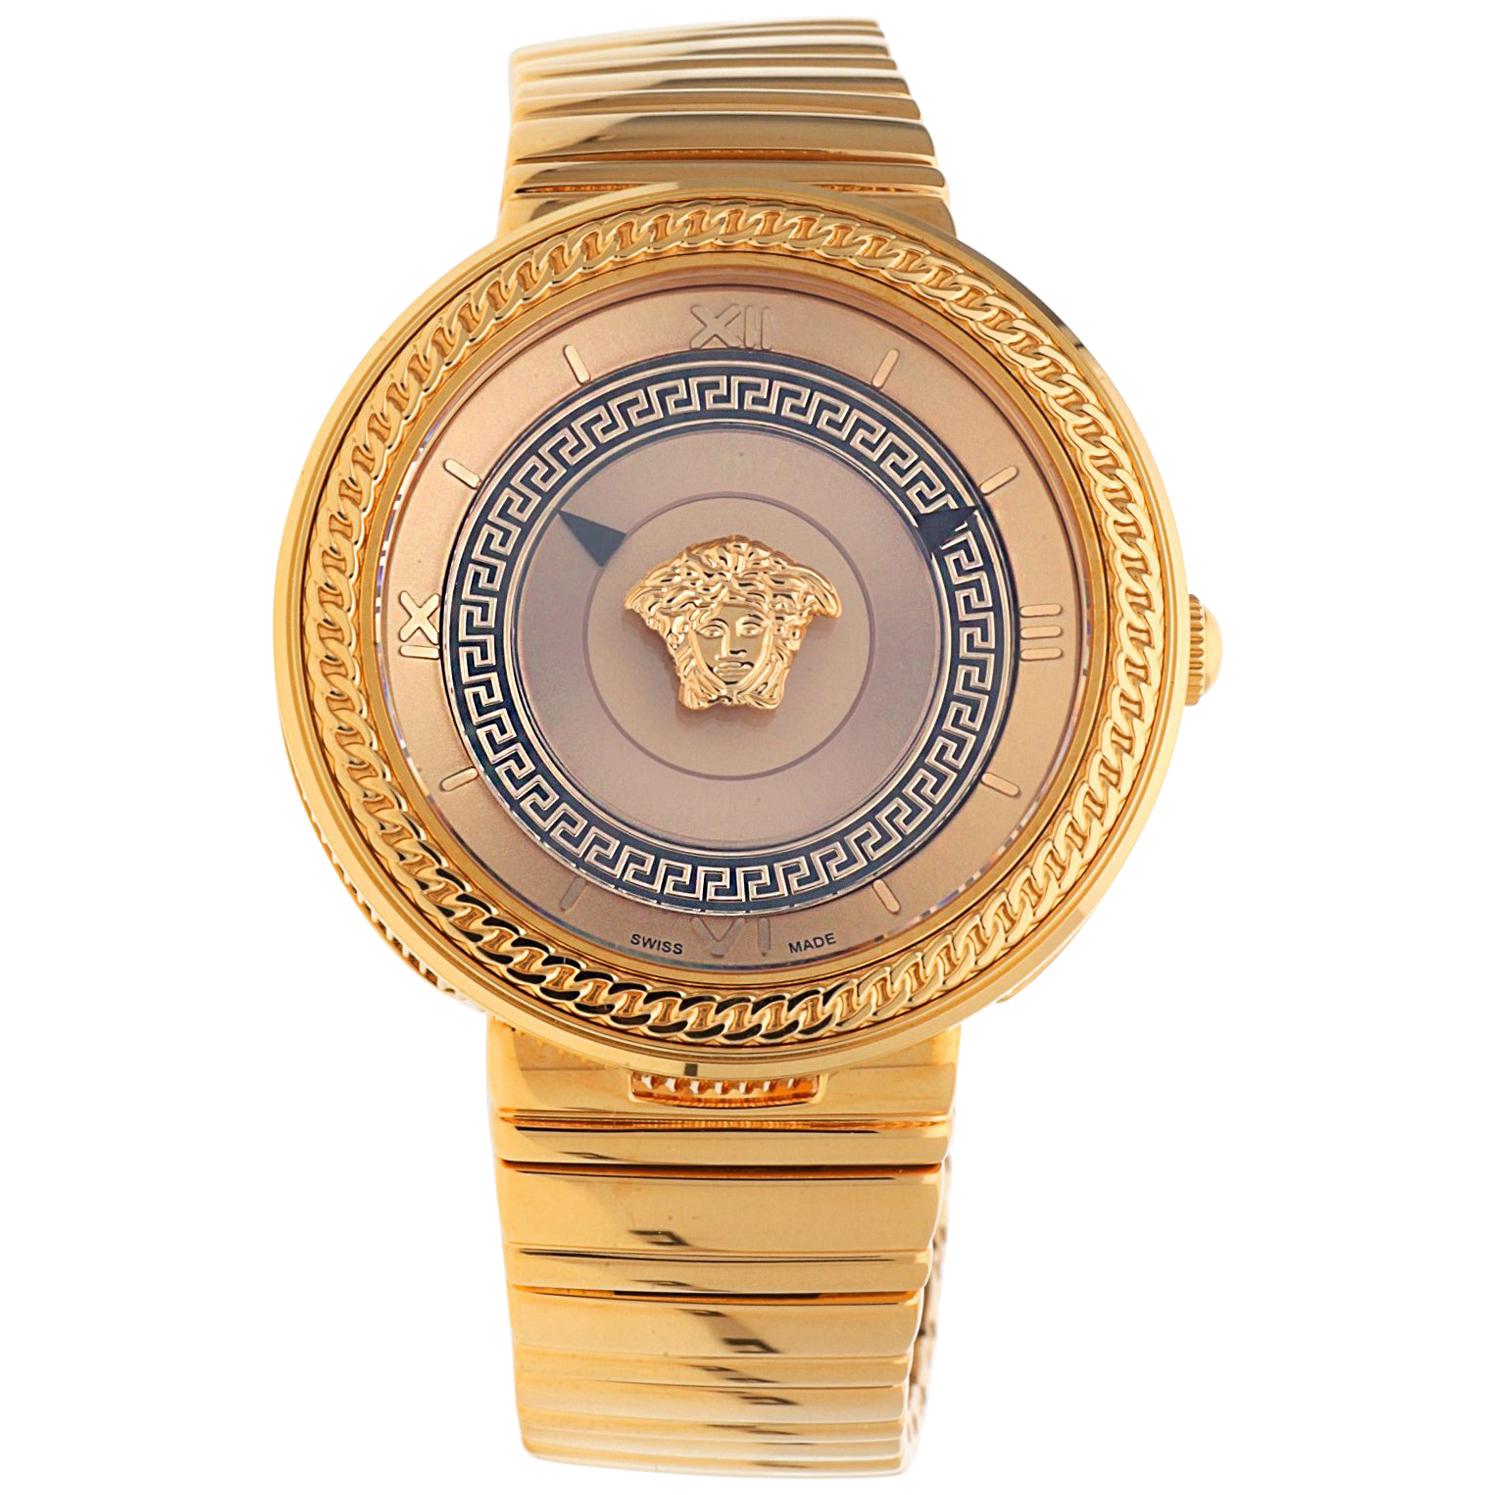 Versace Women Watch V-METAL ICON pink gold VLC090014 For Sale